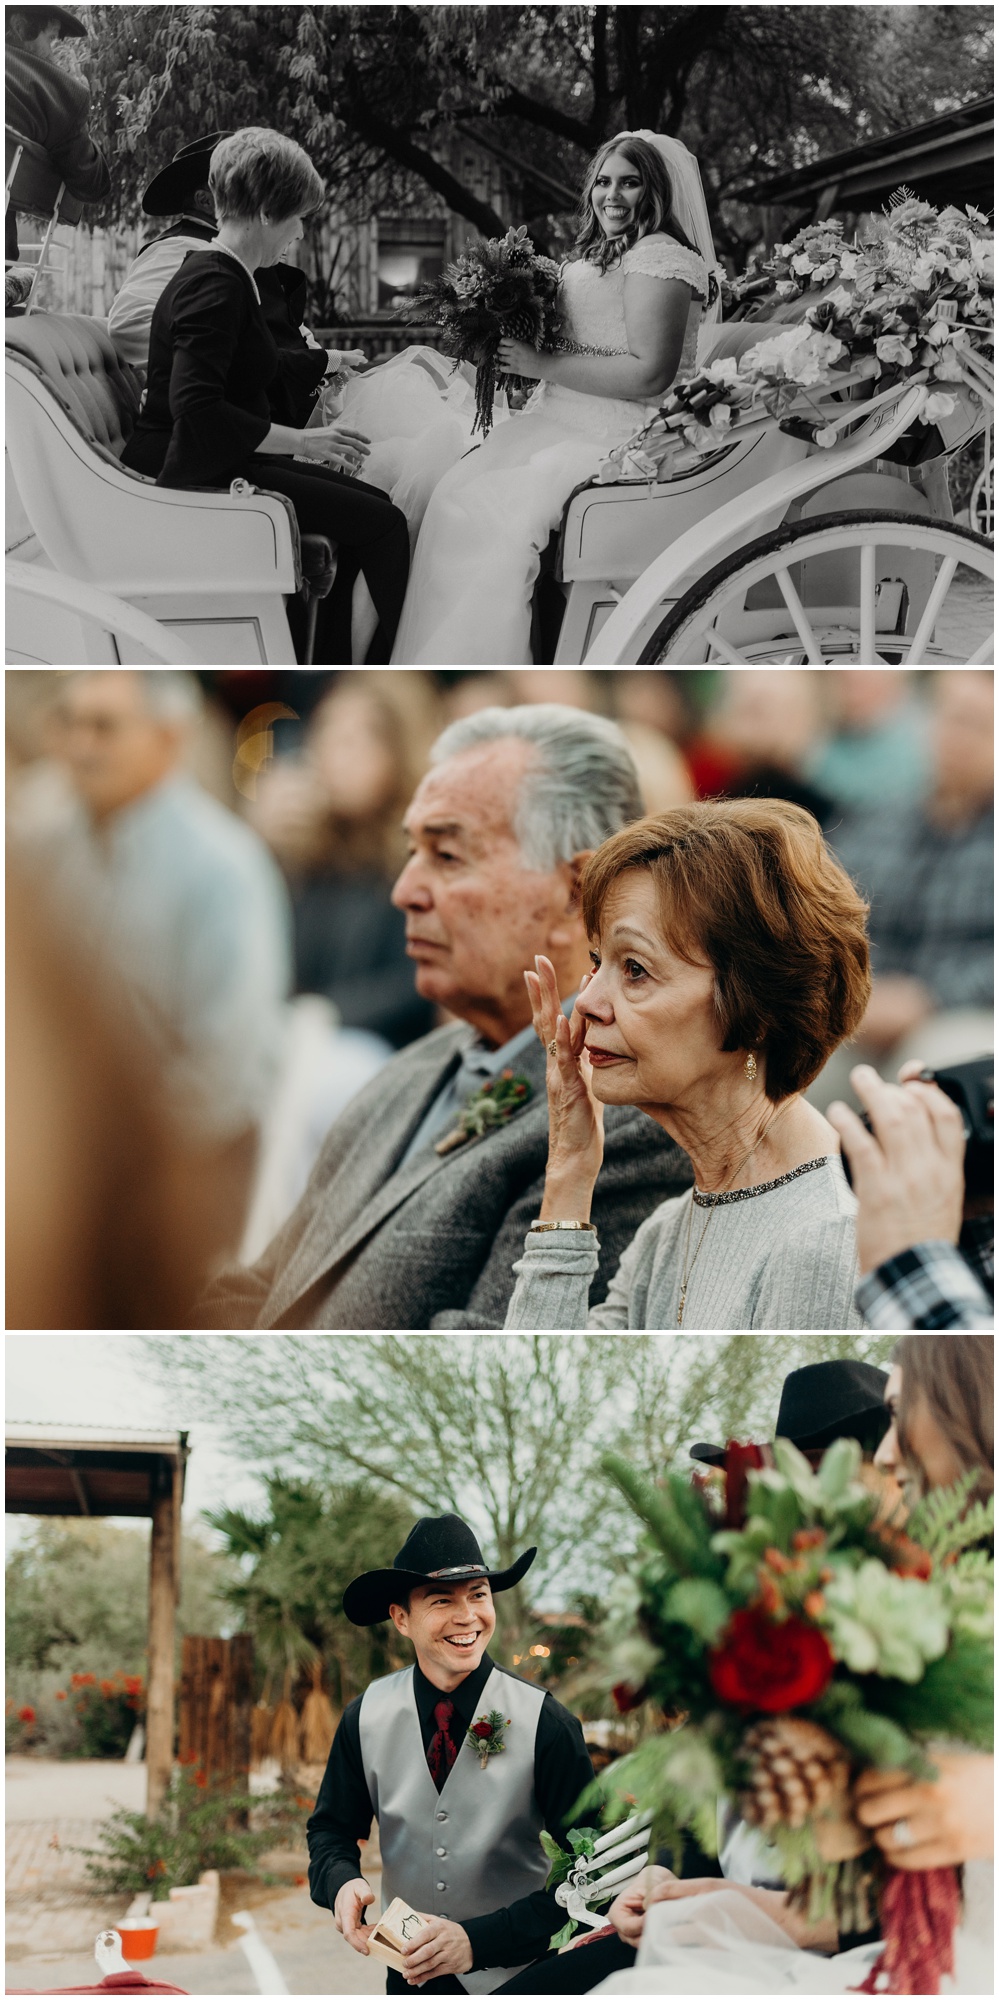 Genuine and authentic moments documented for a Christmas Country Wedding at the Windmill Winery.